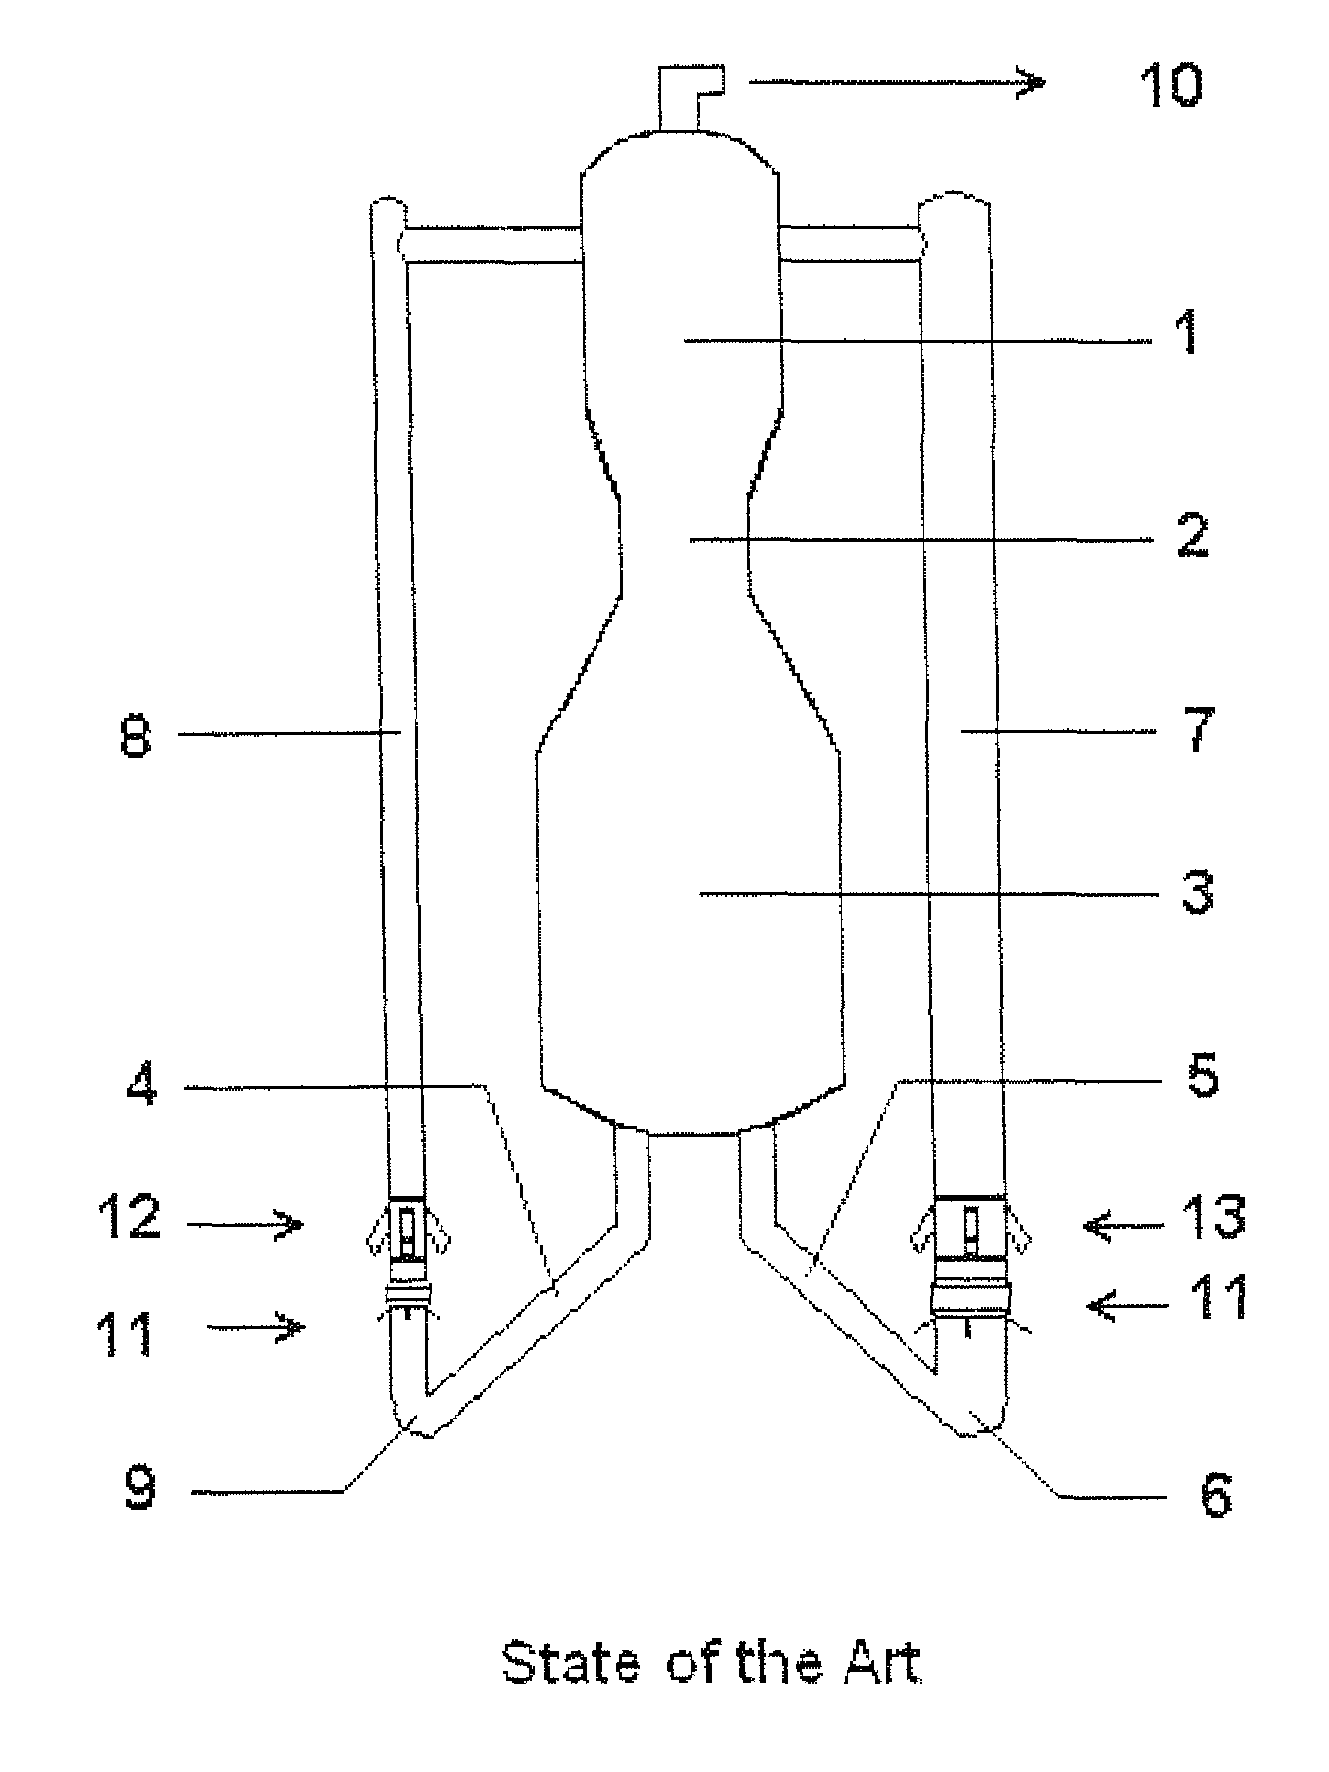 Process for fluid catalytic cracking of hydrocarbon feedstocks with high levels of basic nitrogen